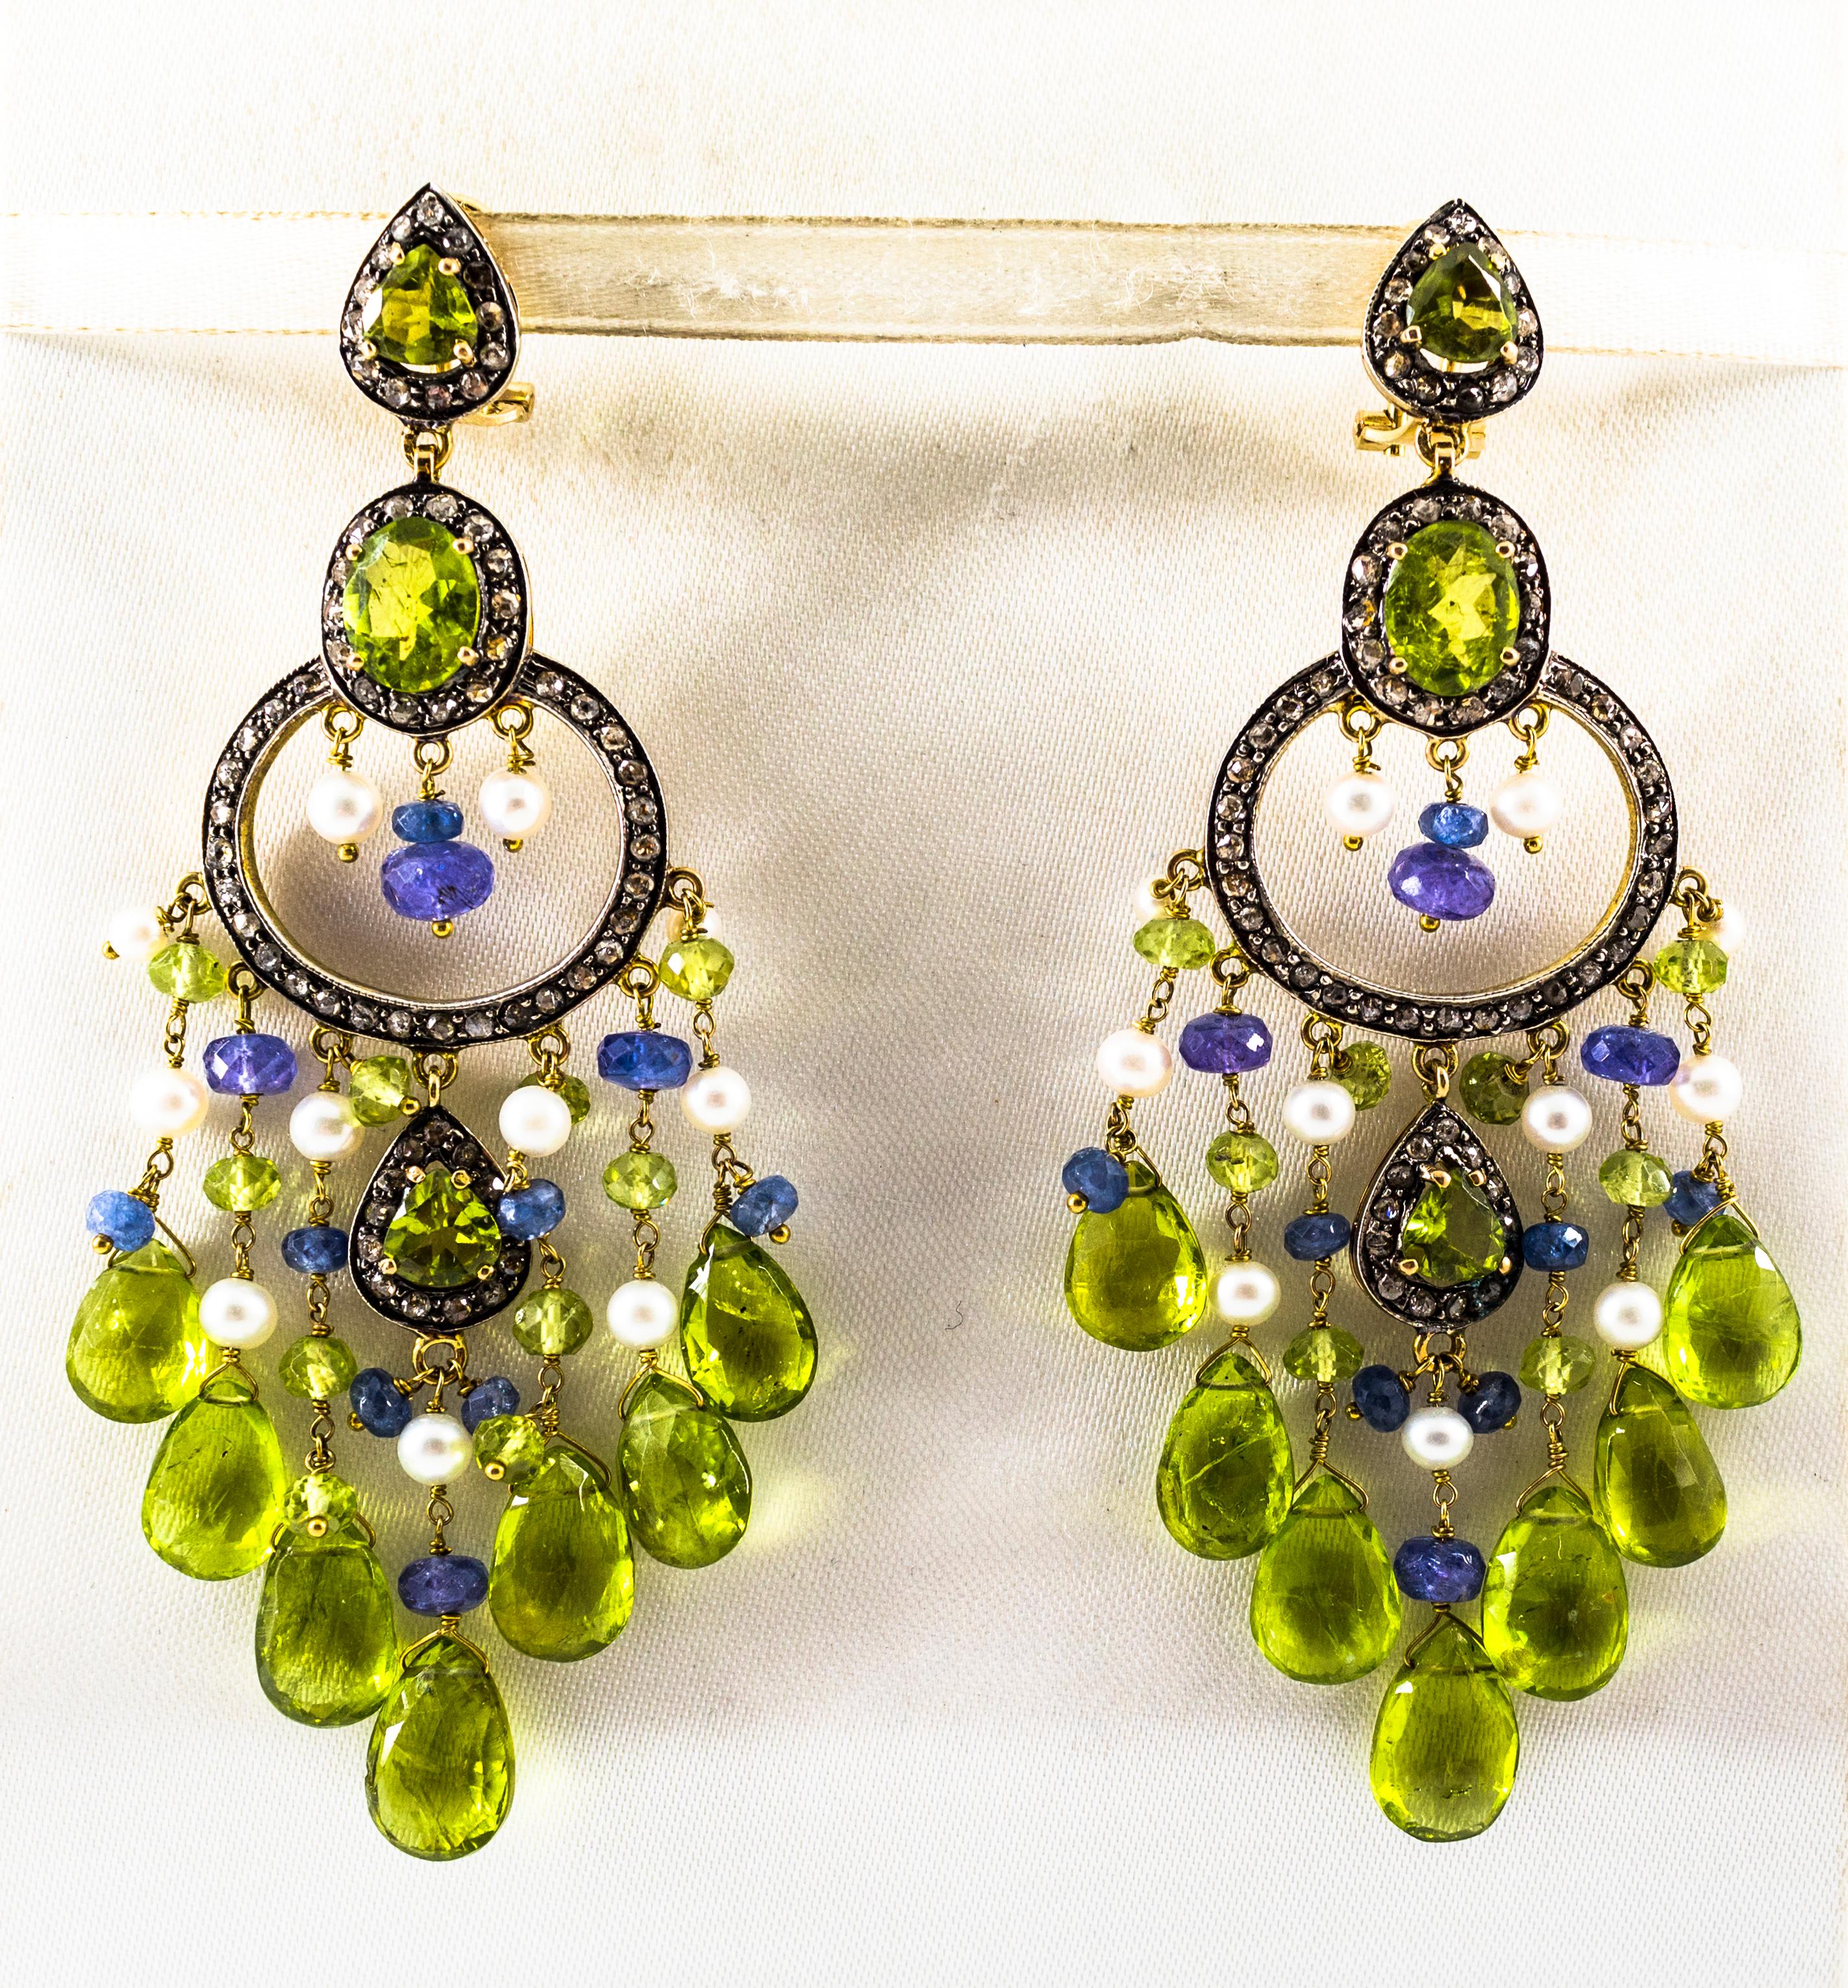 These Earrings are made of 9K Yellow Gold and Sterling Silver.
These Earrings have 2.65 Carats of White Rose Cut Diamonds.
These Earrings have 4.80 Carats of Tanzanite.
These Earrings have 38.20 Carats of Peridot.
These Earrings have also